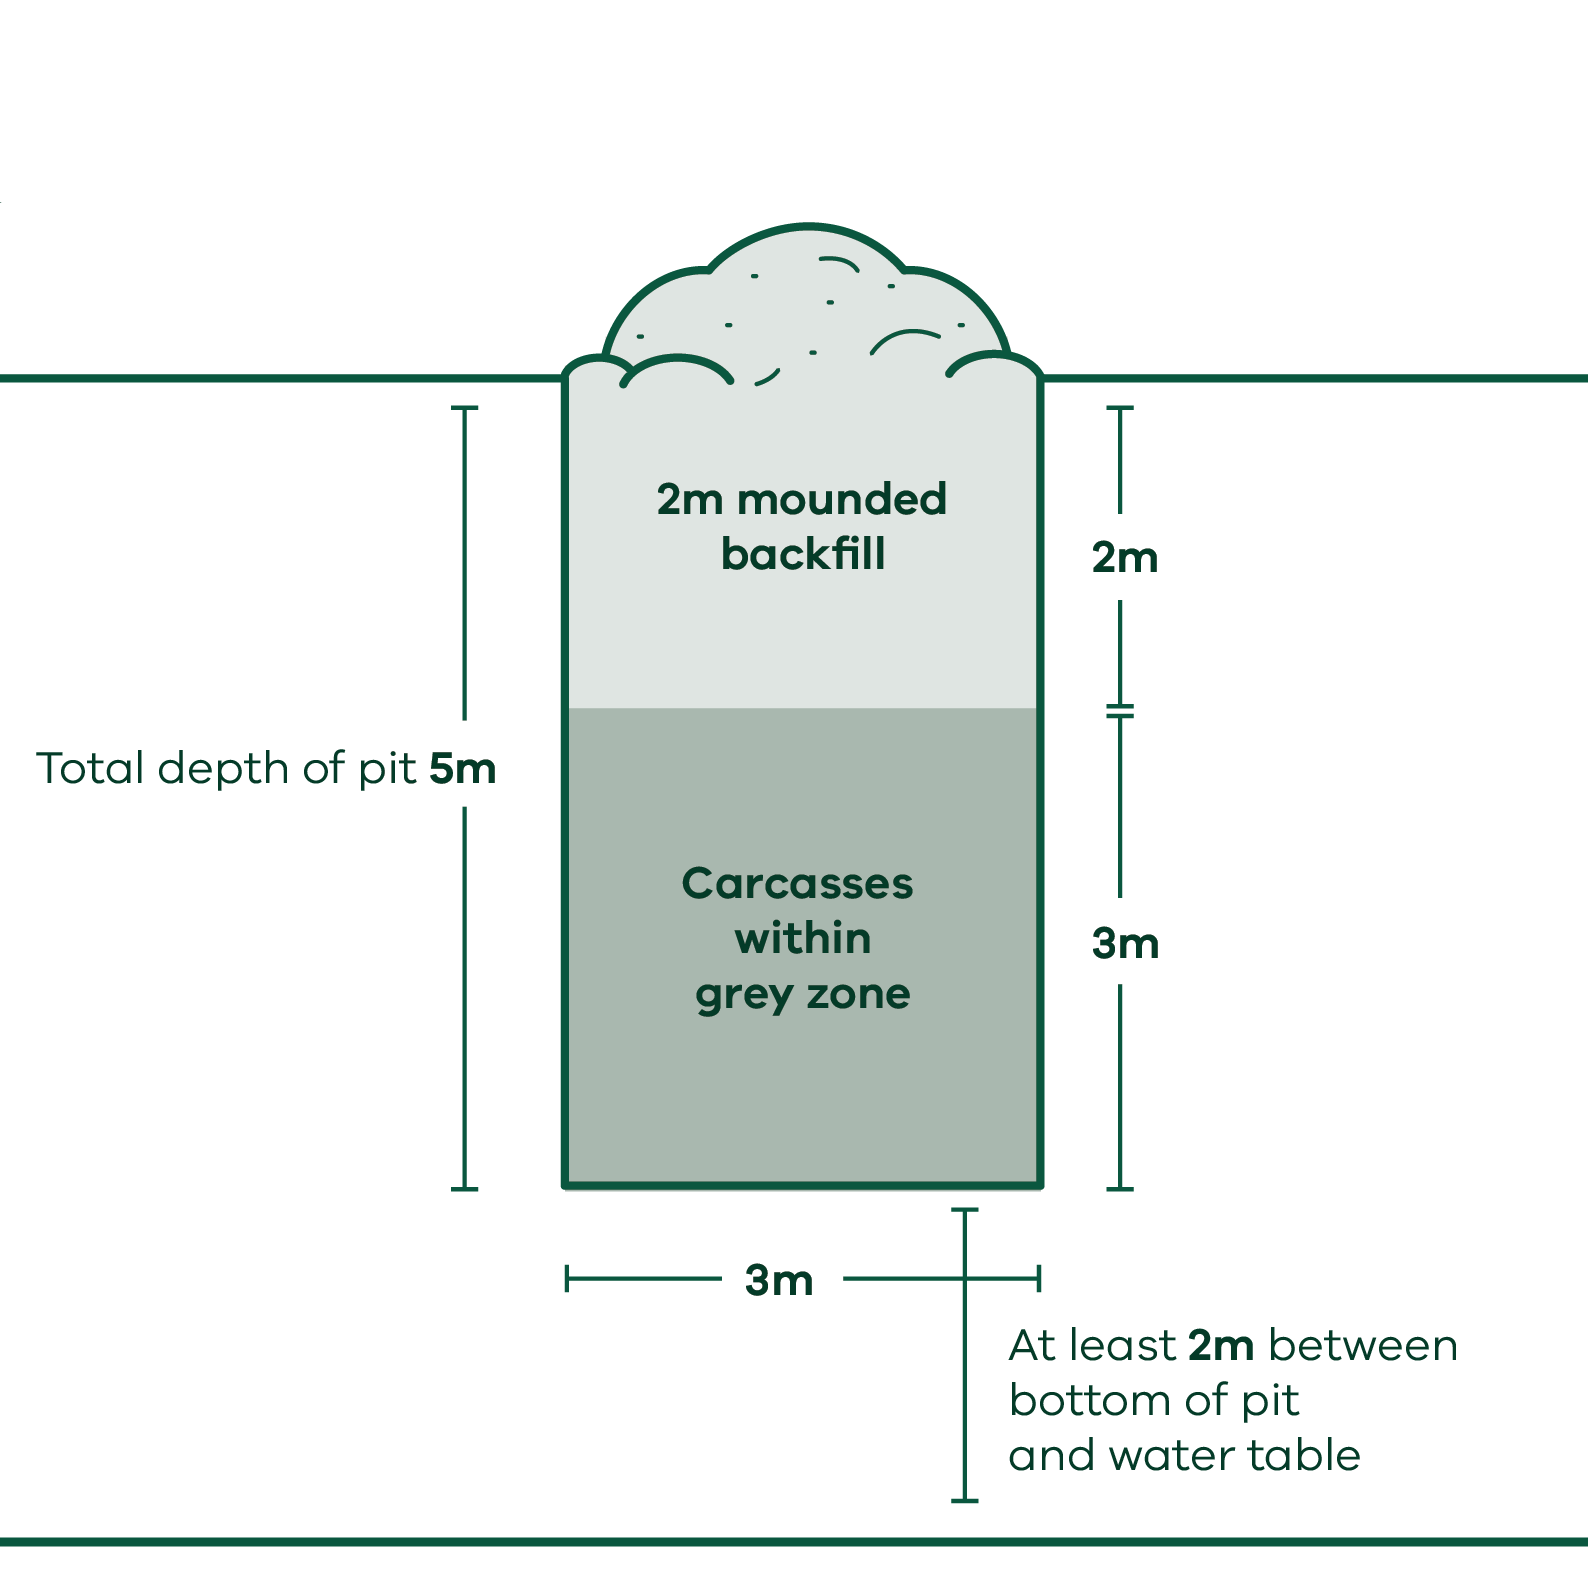 Diagram of traditional trench-style burial pit that is 5m deep, 3 m wide with a 2mm mounded backfill at top. There must be at least 2 m between the bottom of pit and water table.